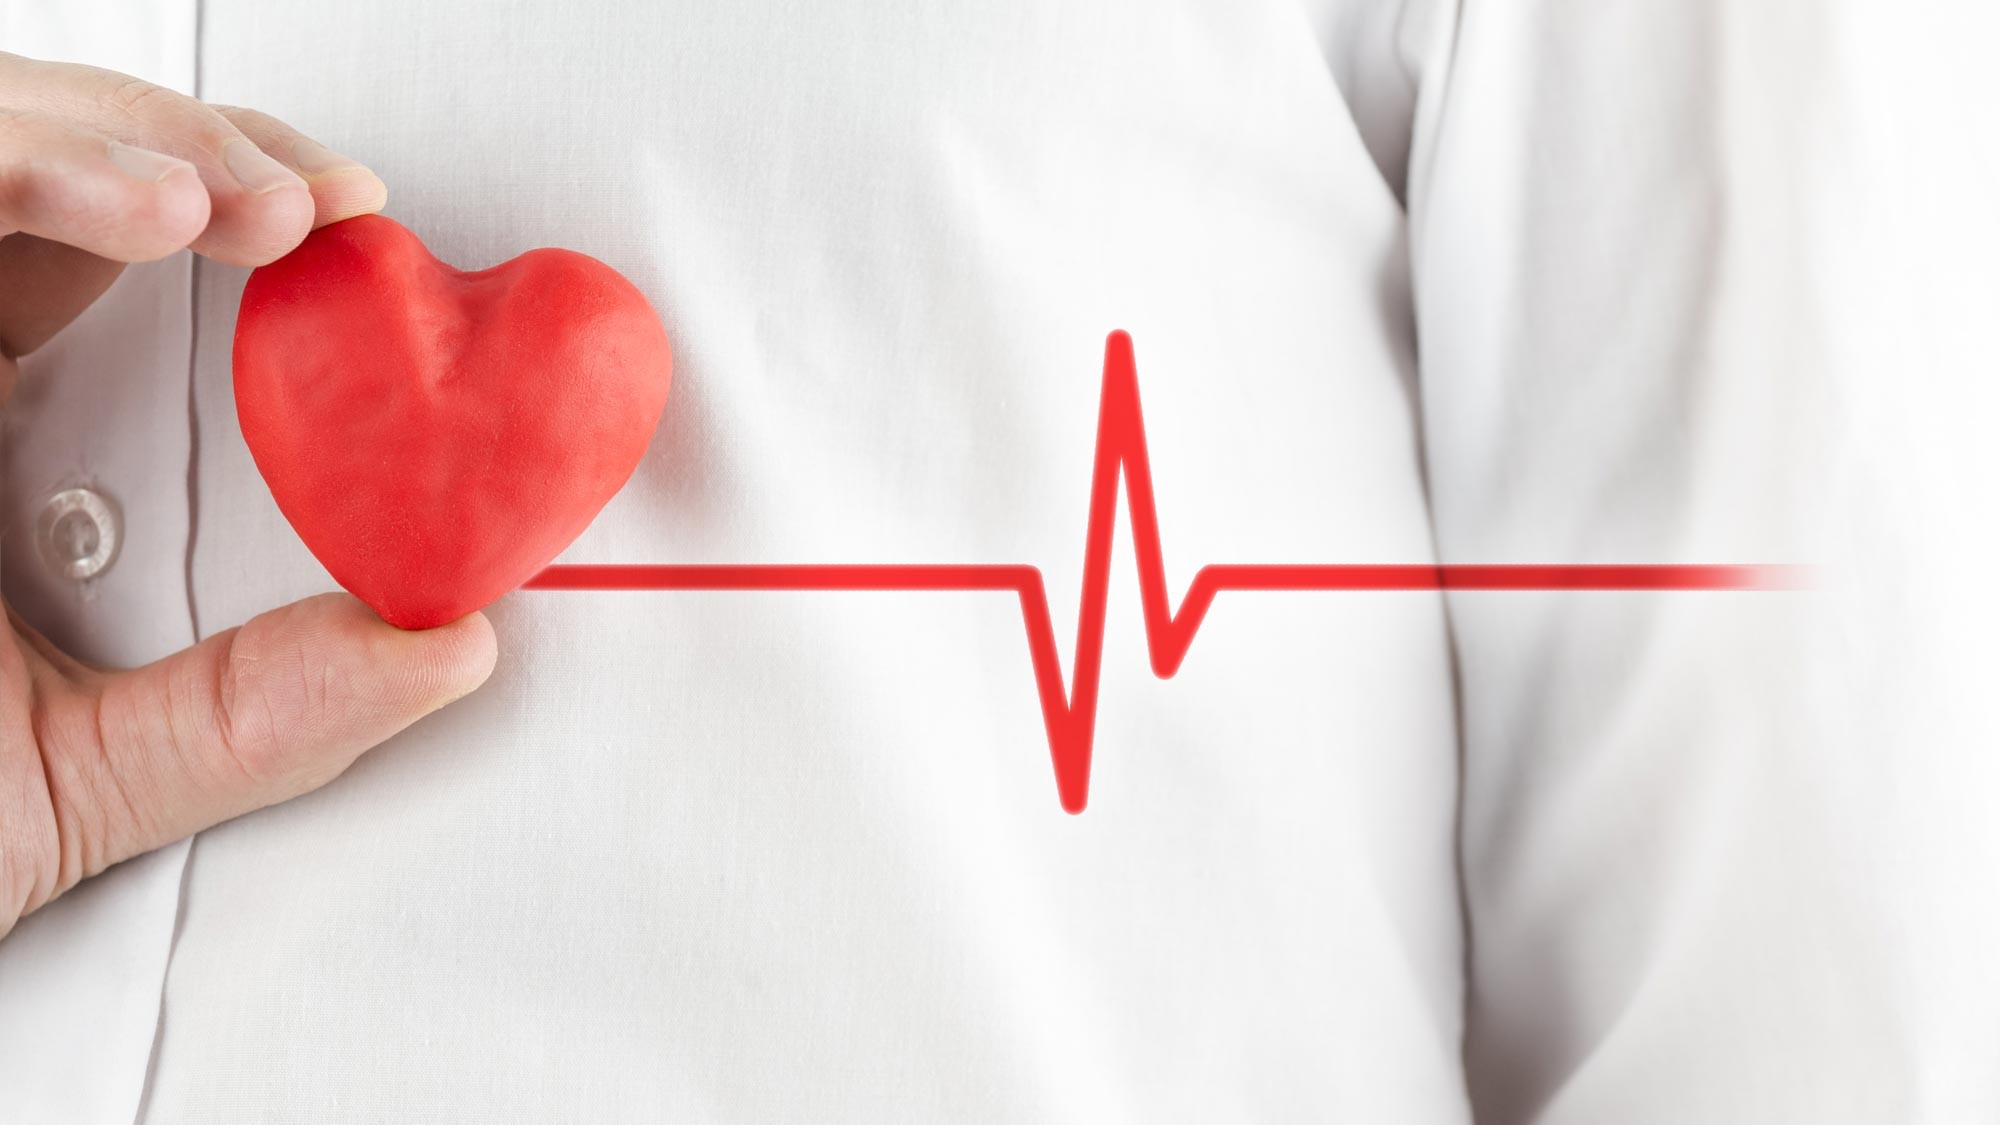 Heart Attack and Stroke in the Work Place: Do you know the Warning Signs?